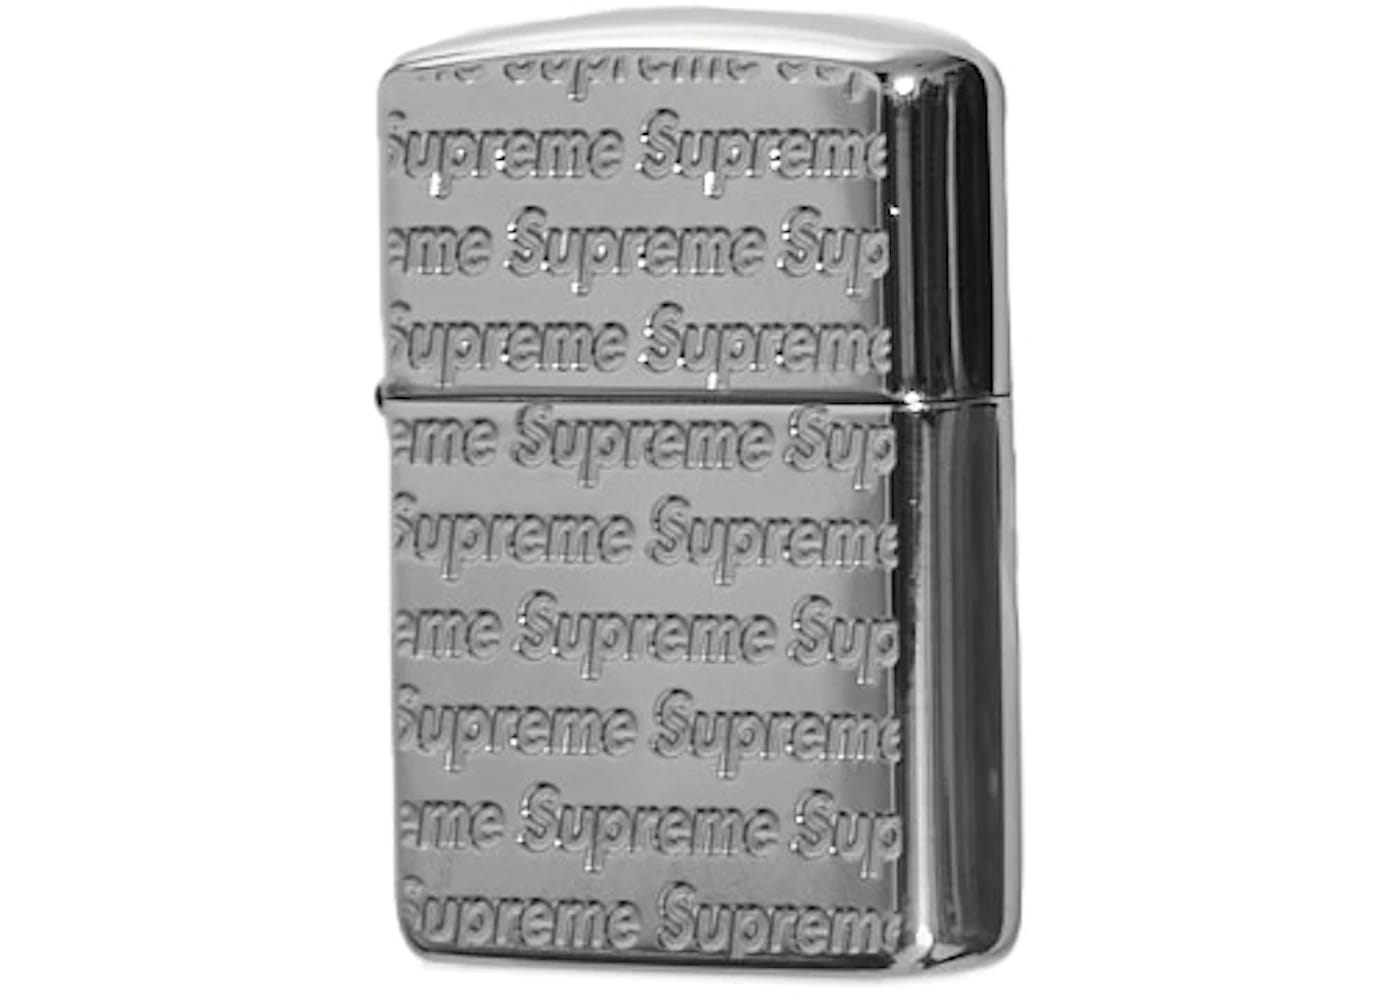 Zippo Supreme Swarovski Lighter – Theluxurysouq  India's Fastest Growing  Luxury Boutique. New & Pre Owned Luxury. 100% Authentic.